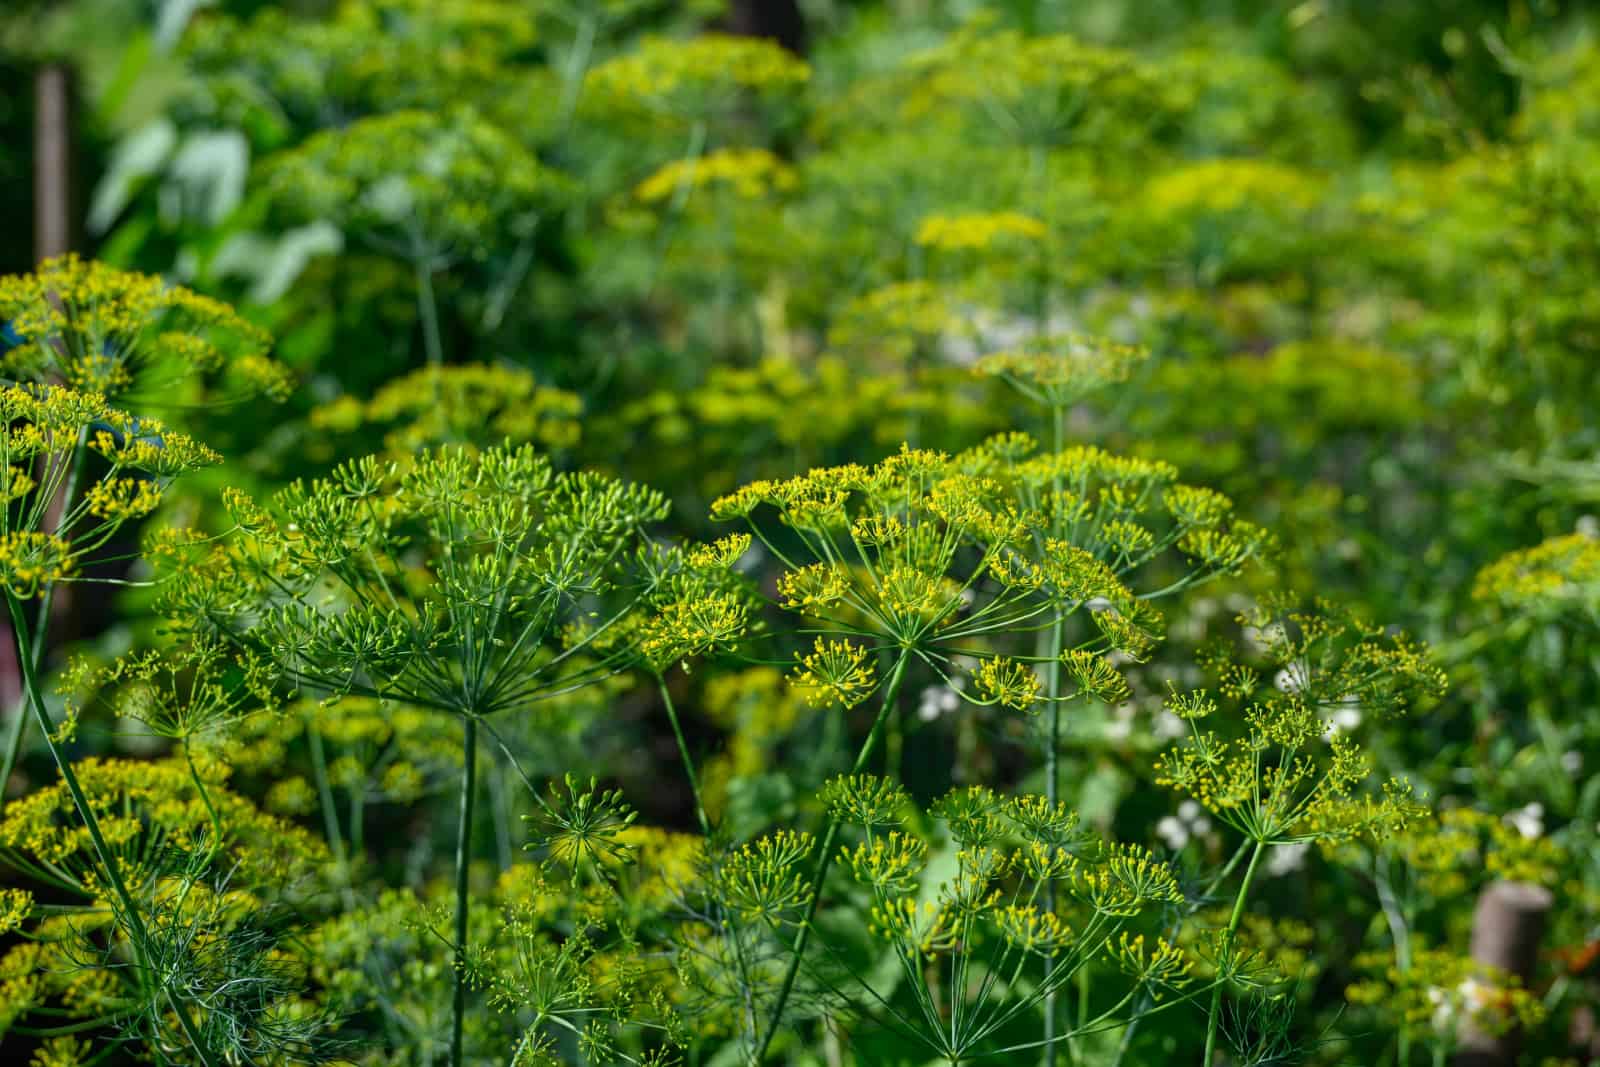 Dill plants in bloom in the home garden